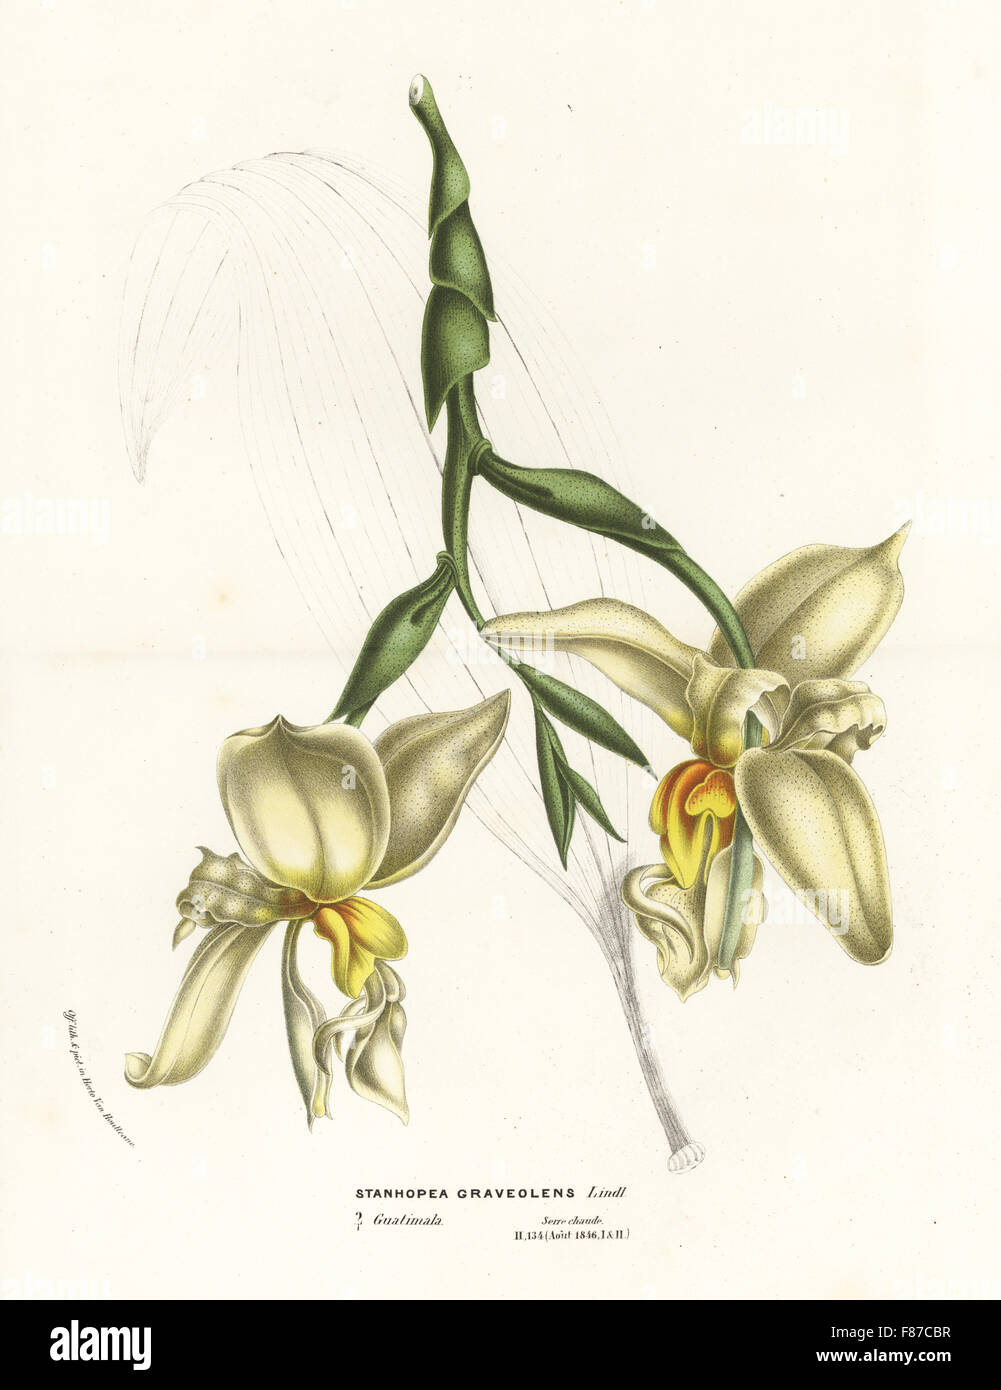 Stanhopea graveolens orchid. Handcoloured lithograph from Louis van Houtte and Charles Lemaire's Flowers of the Gardens and Hothouses of Europe, Flore des Serres et des Jardins de l'Europe, Ghent, Belgium, 1870. Stock Photo